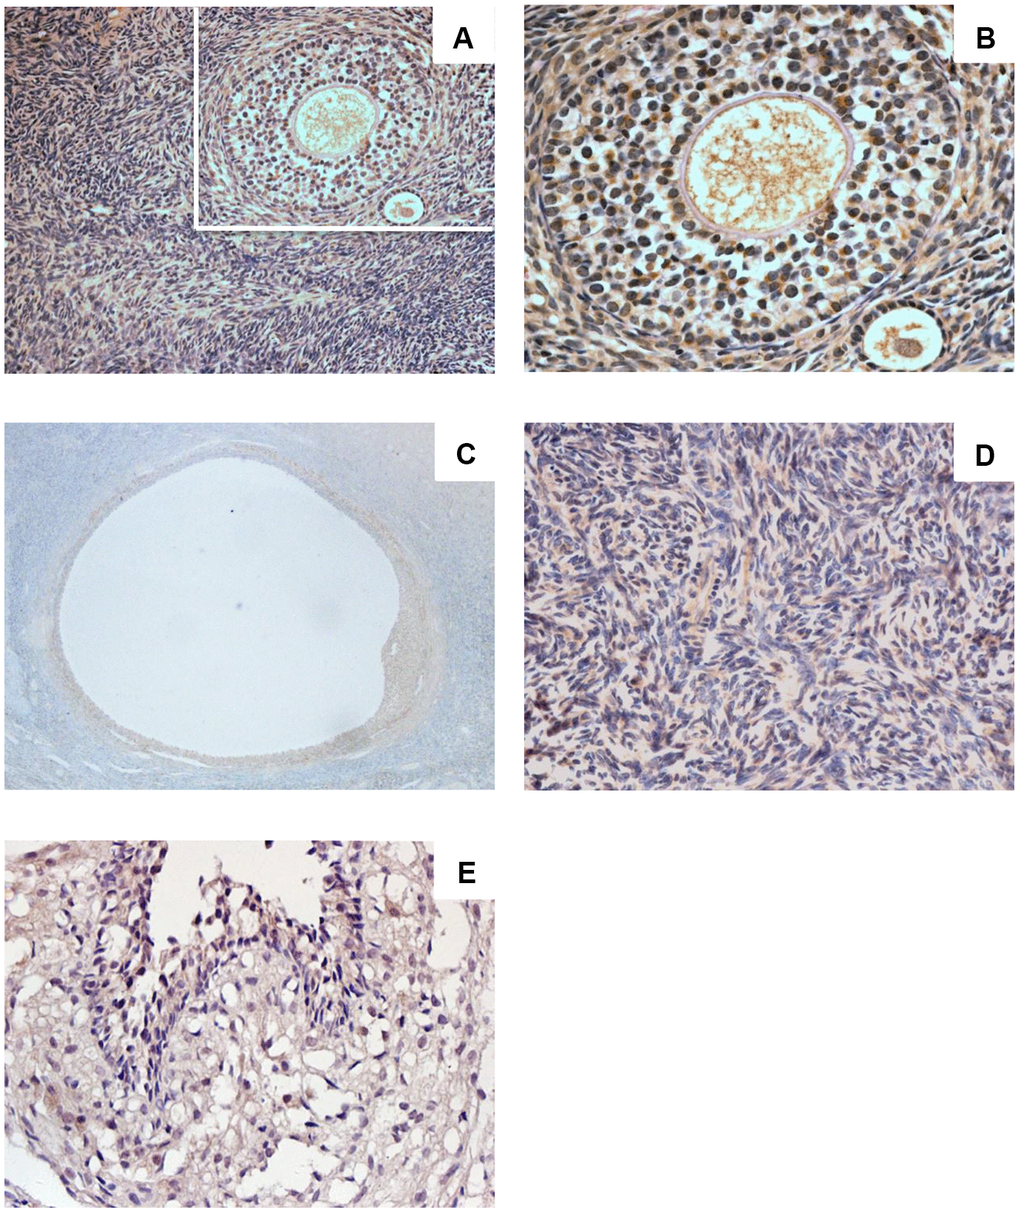 Sigma-1 Receptor Expression in Ovary Tissue. Ovarian cortex in women of childbearing age (A, ×200) (C, ×400) showed intense immunostaining. Intense immunostaining was observed inovarian granulosa cells and theca cells of growing follicle (B, ×400). Granulosa cells of mature follicle also showed intense staining (D, ×200). Low immunostaining was observed in human ovarian stromal cells (E, ×400).